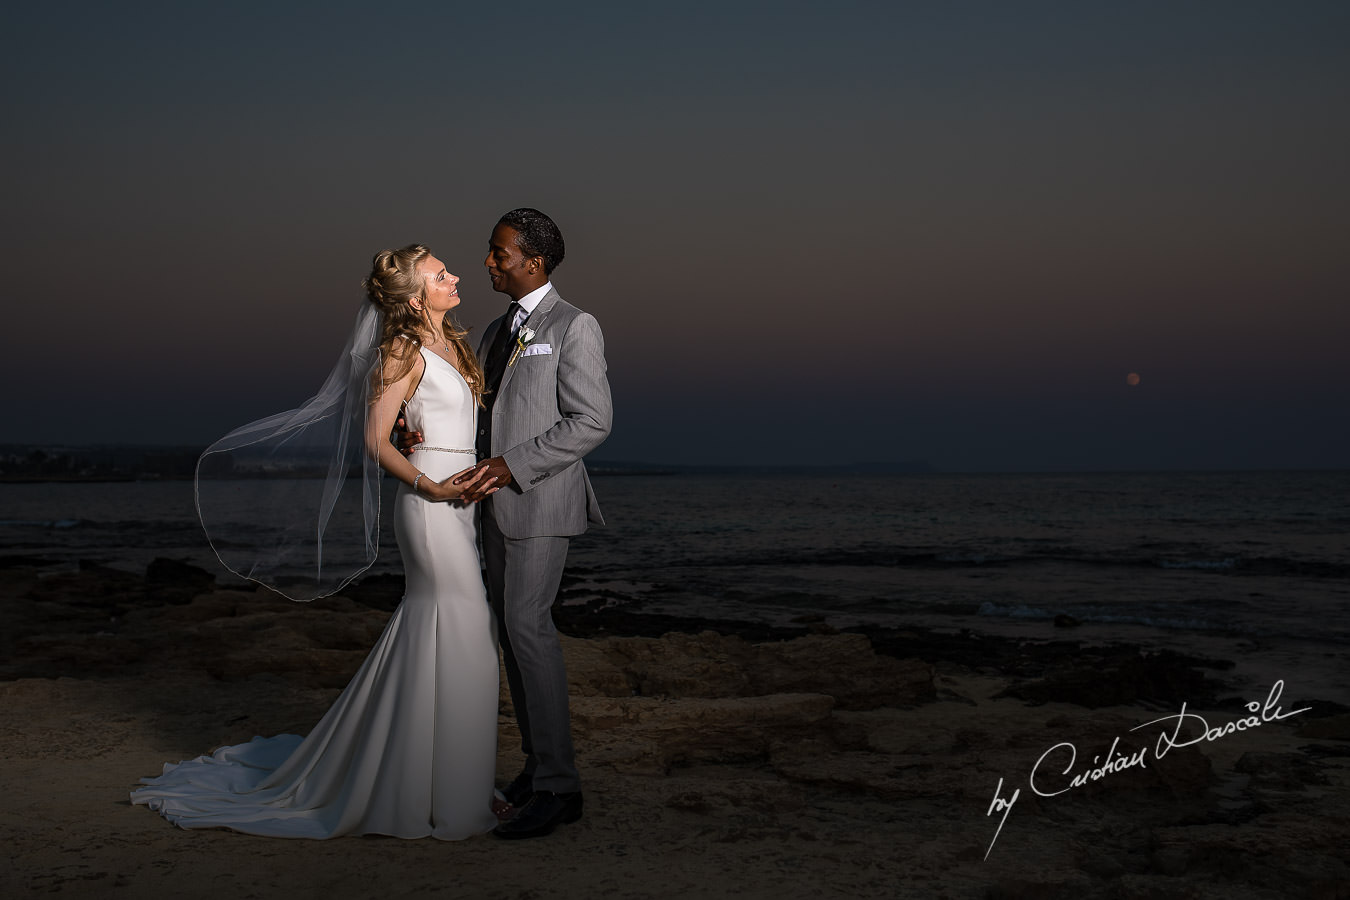 Wedding moments captured at an Exquisite Wedding at Asterias Beach Hotel. Photography by Cyprus Photographer Cristian Dascalu.